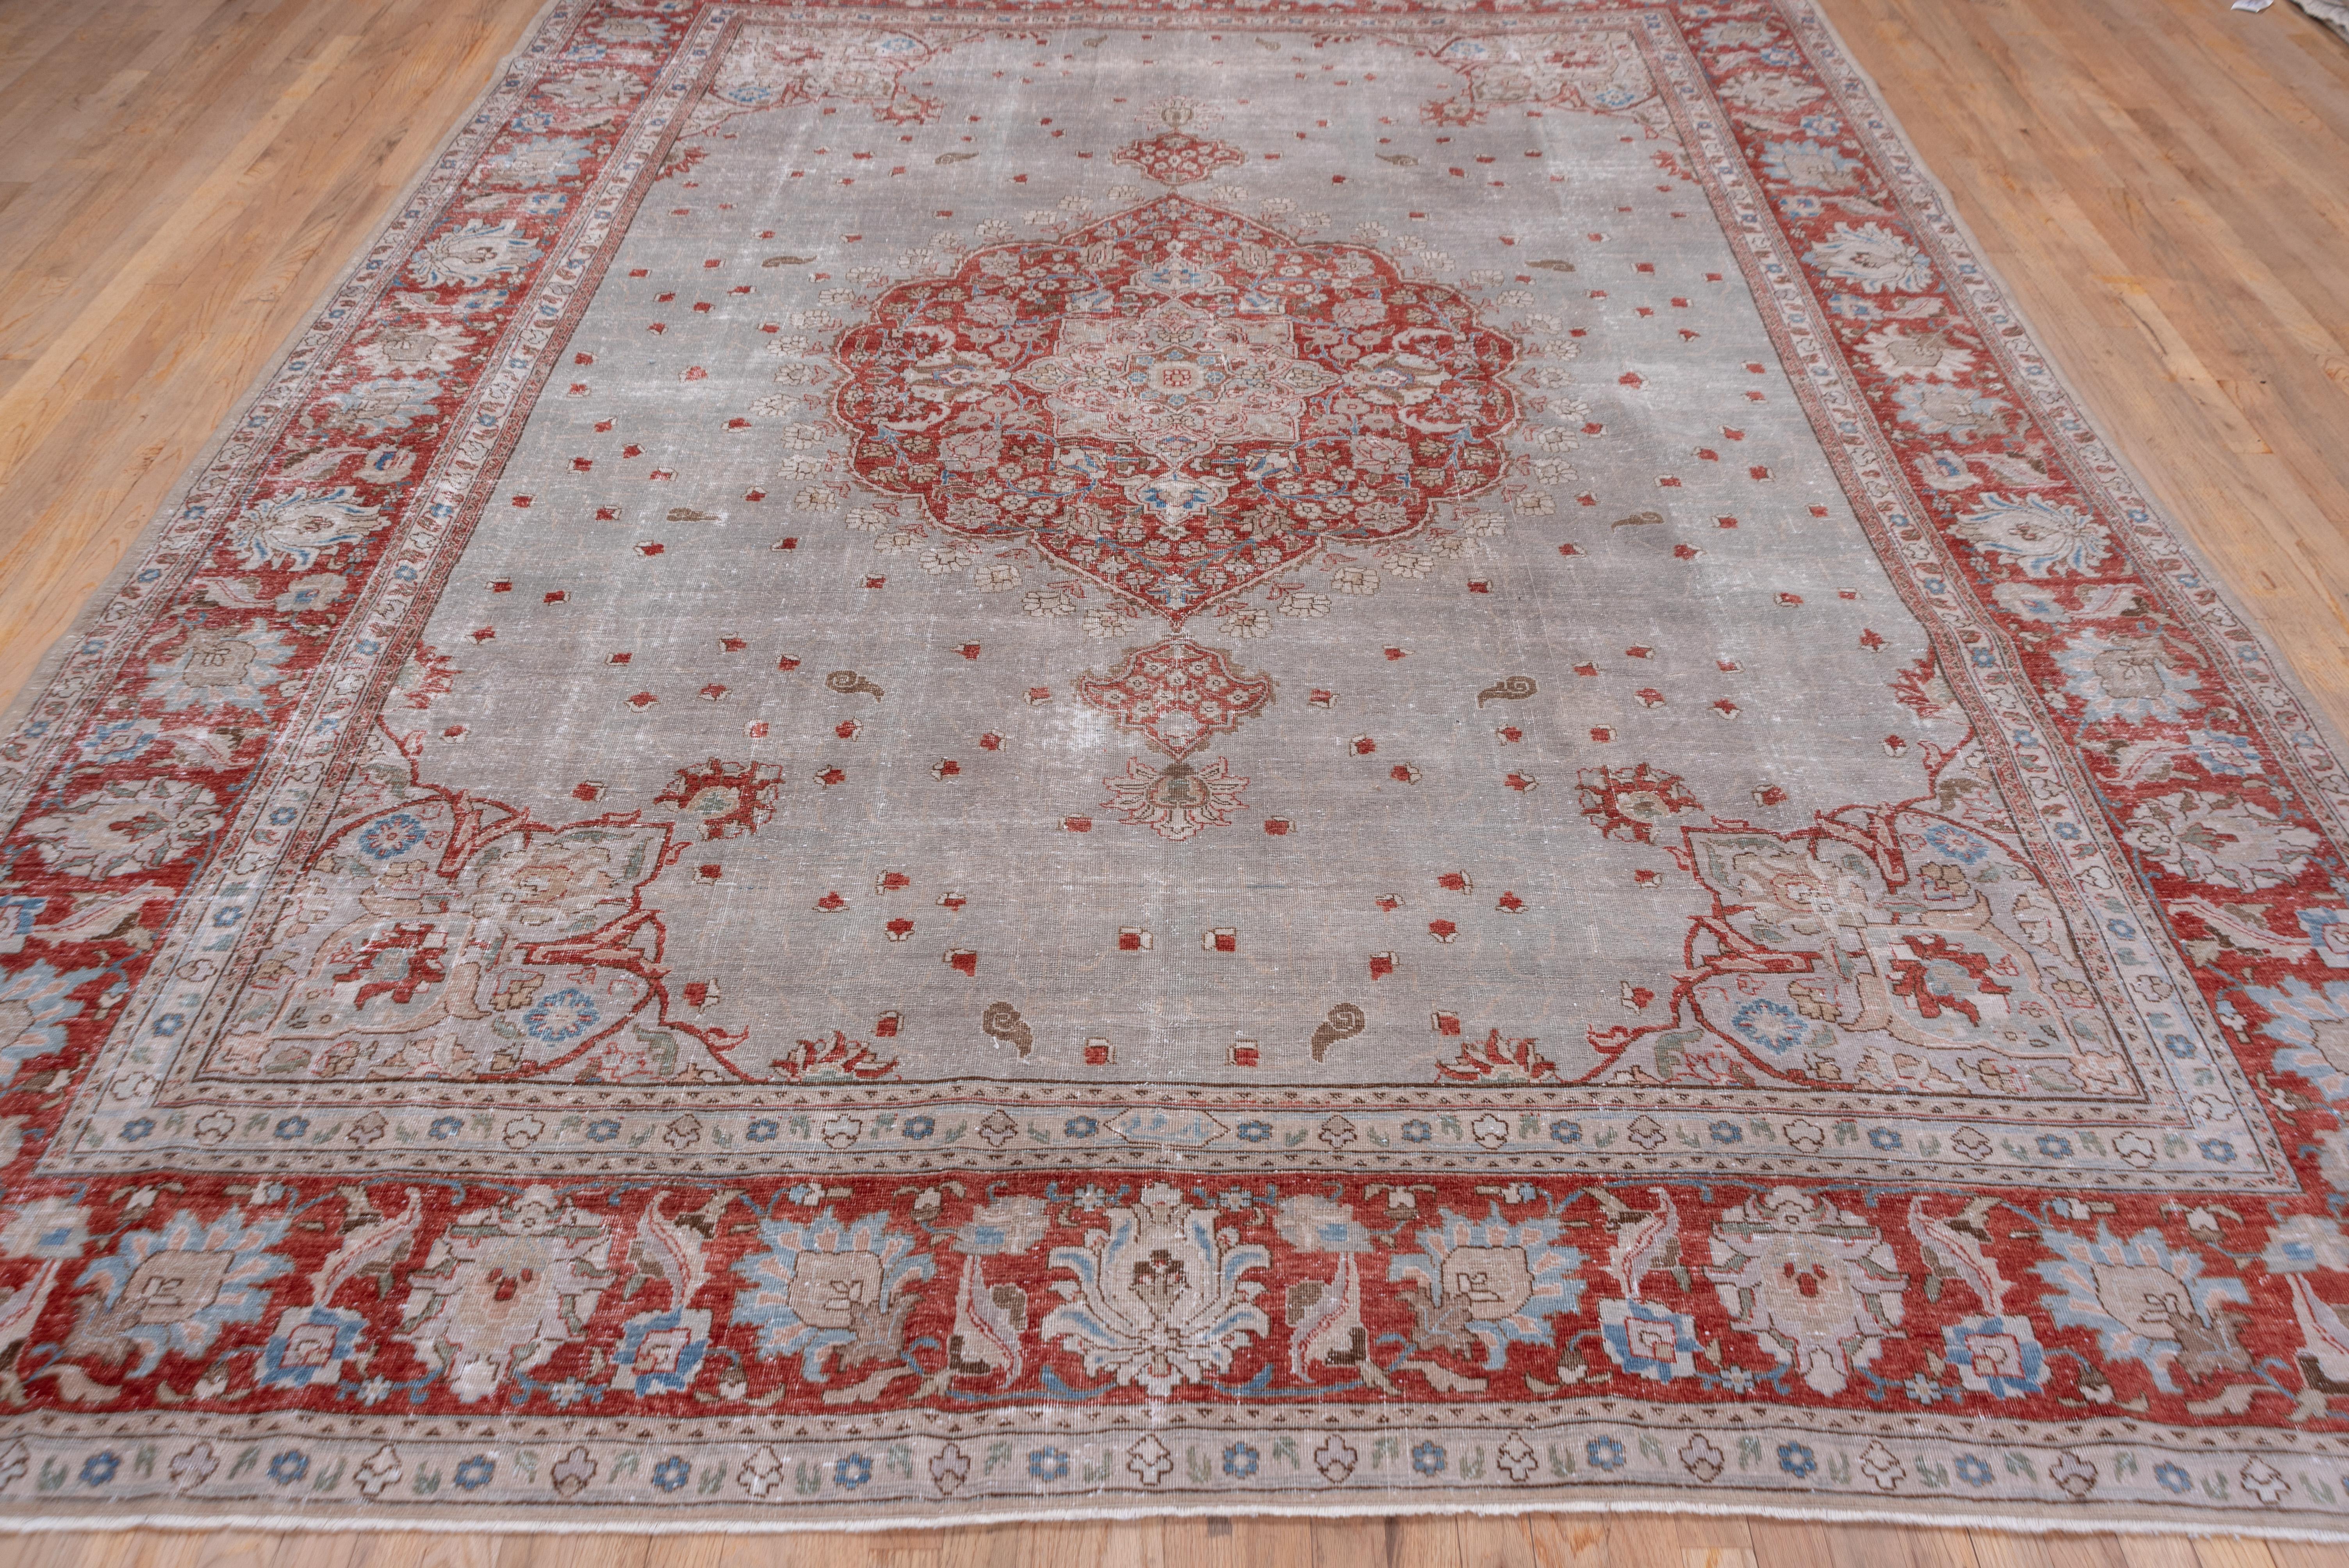 Persian Tabriz rugs are a type of hand-woven carpet that originated in the city of Tabriz, located in northwest Iran. Tabriz is renowned for its long-standing tradition of carpet weaving, and Tabriz rugs are considered to be among the finest and